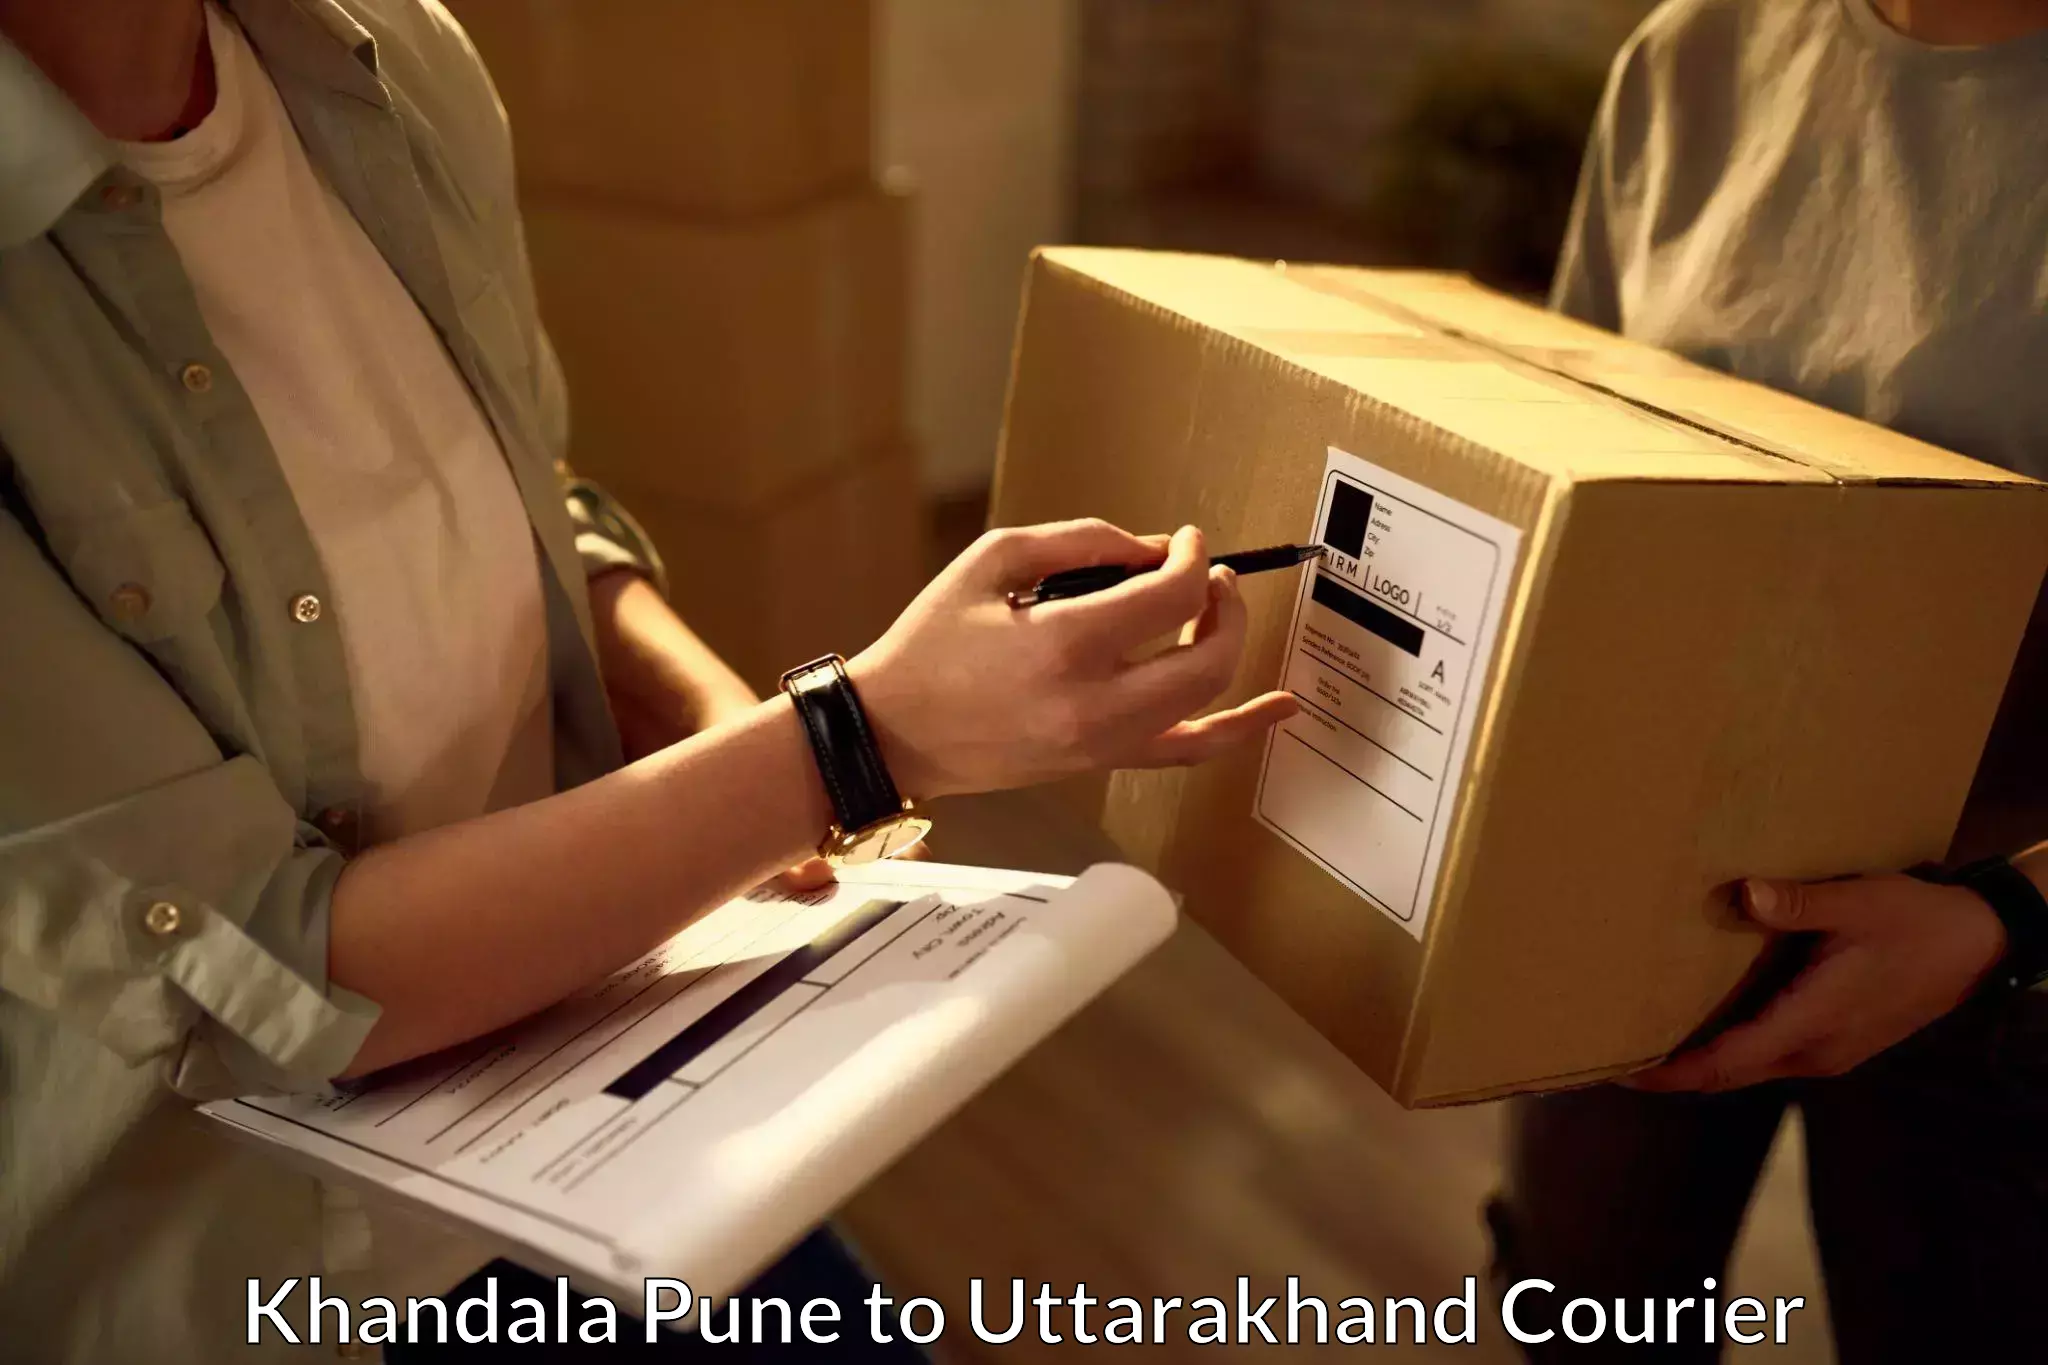 Courier service booking Khandala Pune to Mussoorie